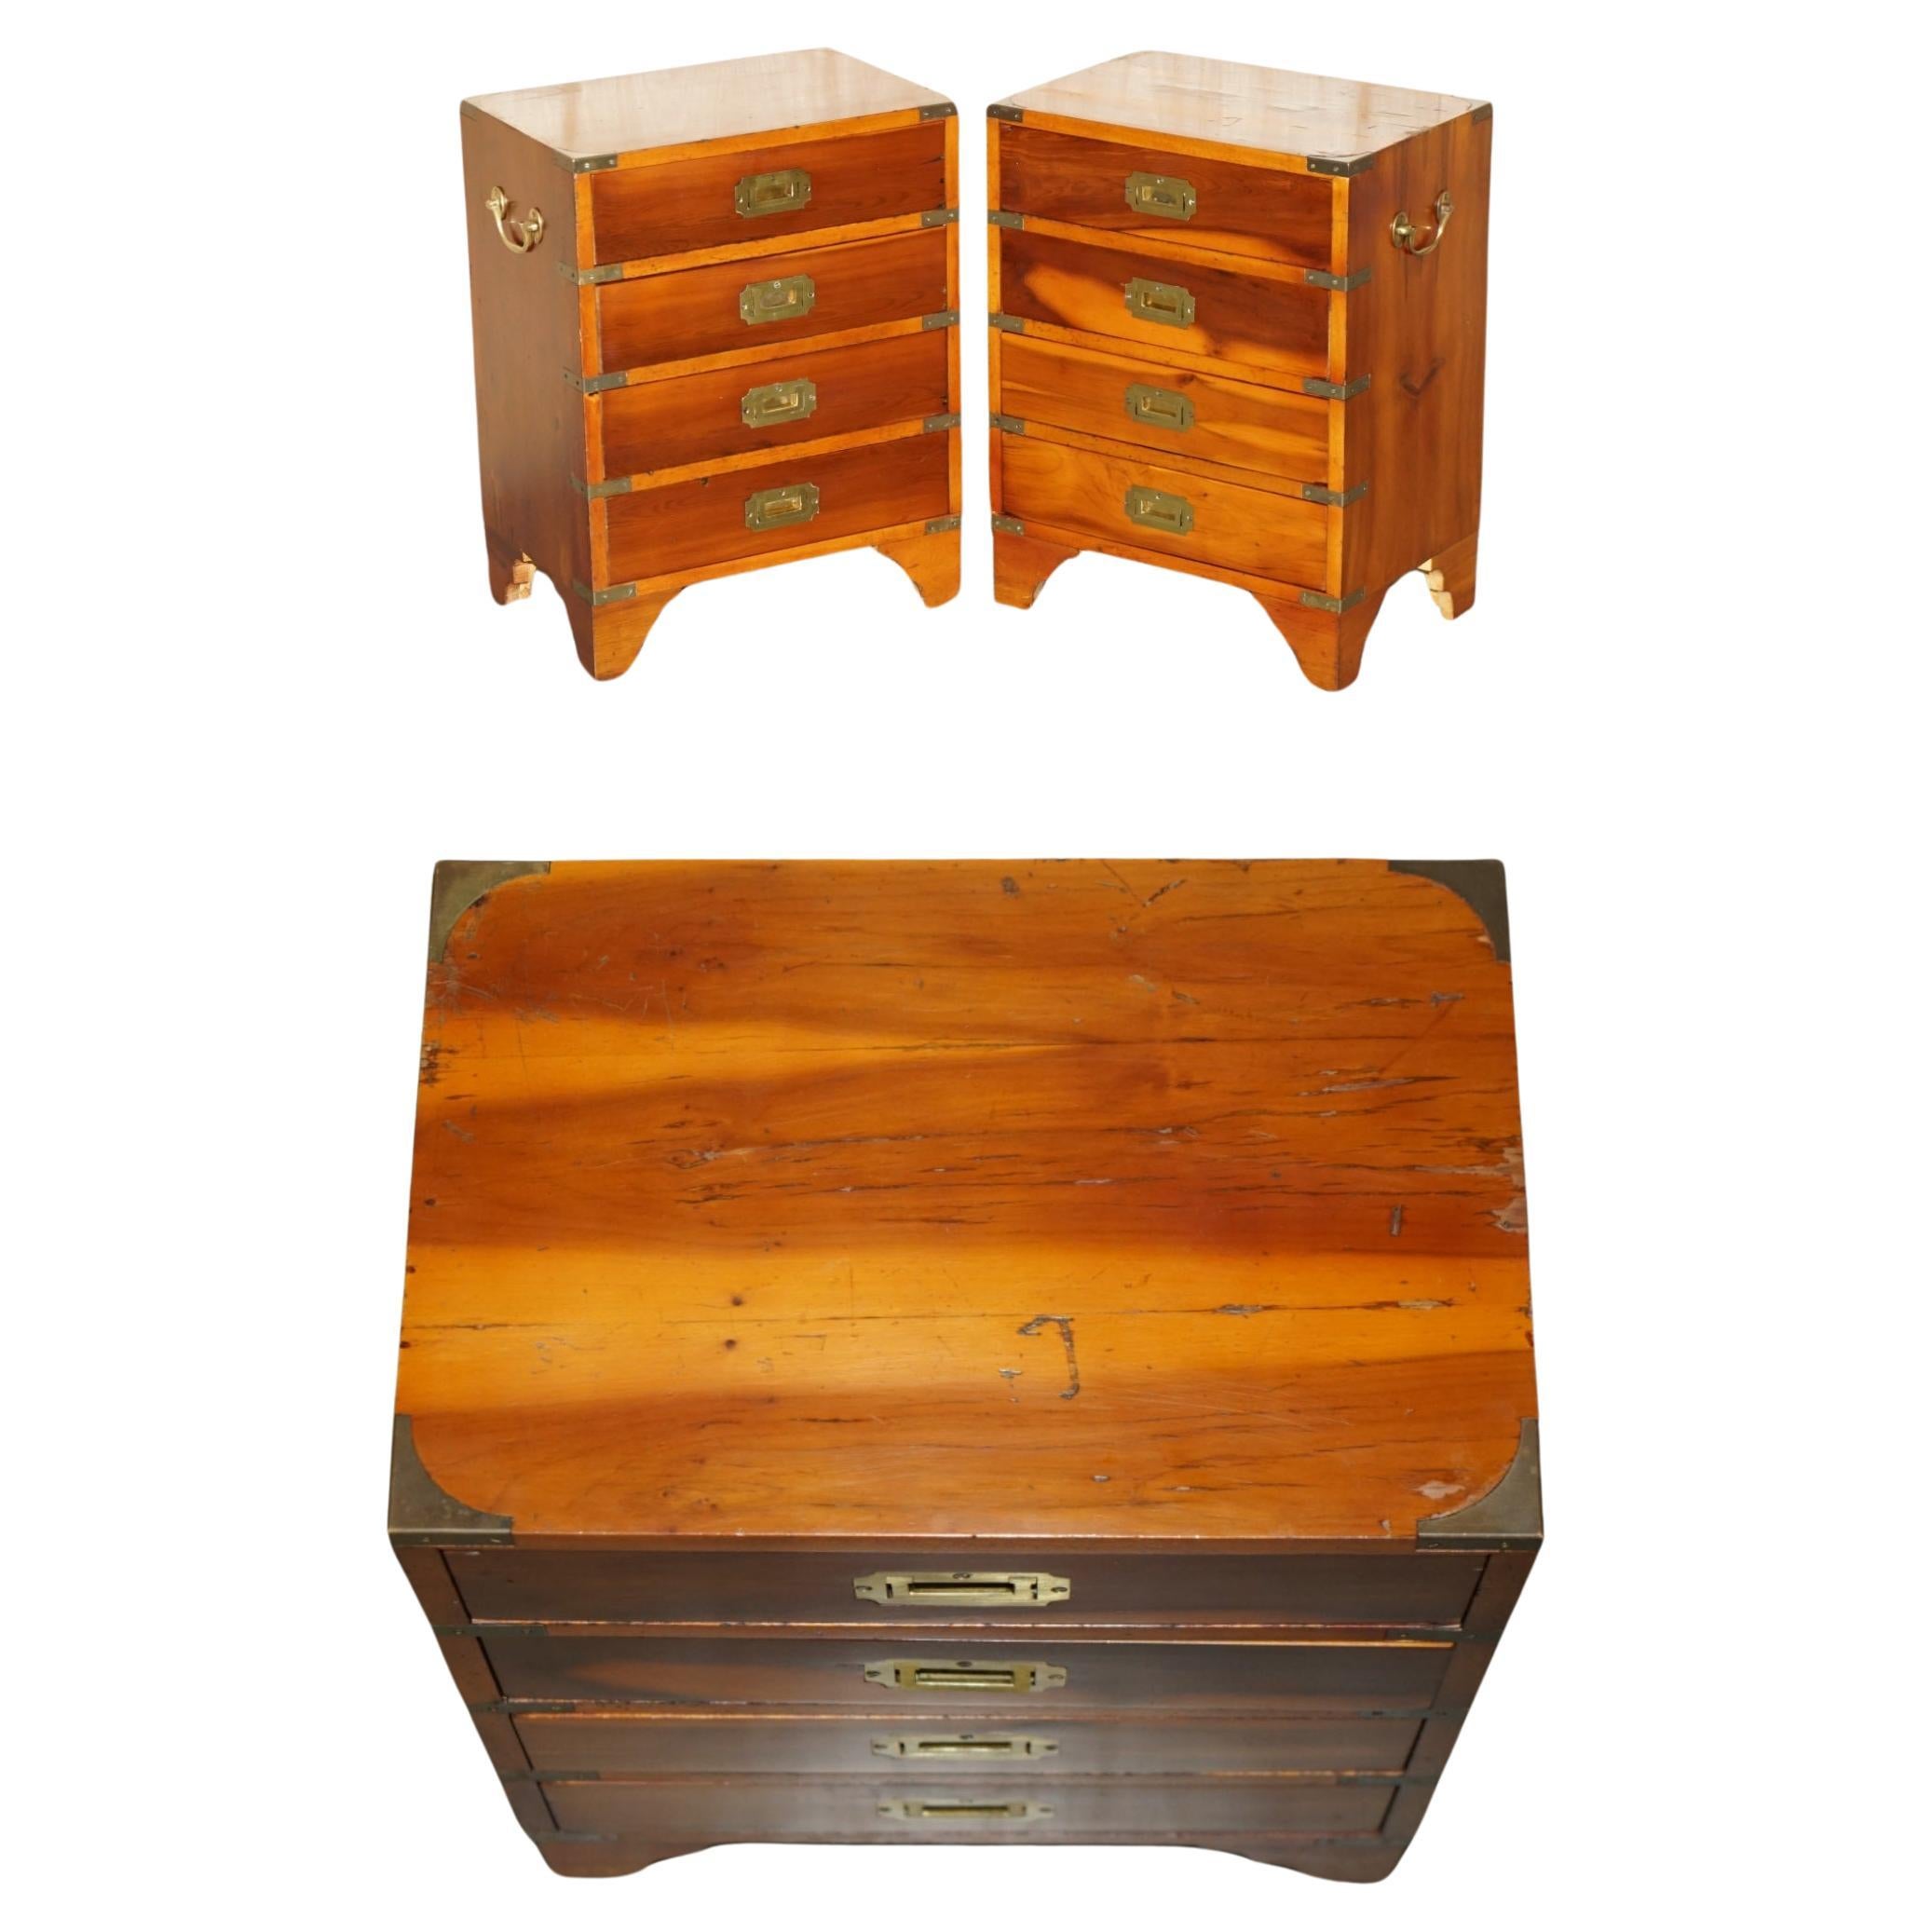 PAIR OF ViNTAGE DISTRESSED MILITARY CAMPAIGN BURR YEW WOOD SIDE TABLE DRAWERS For Sale